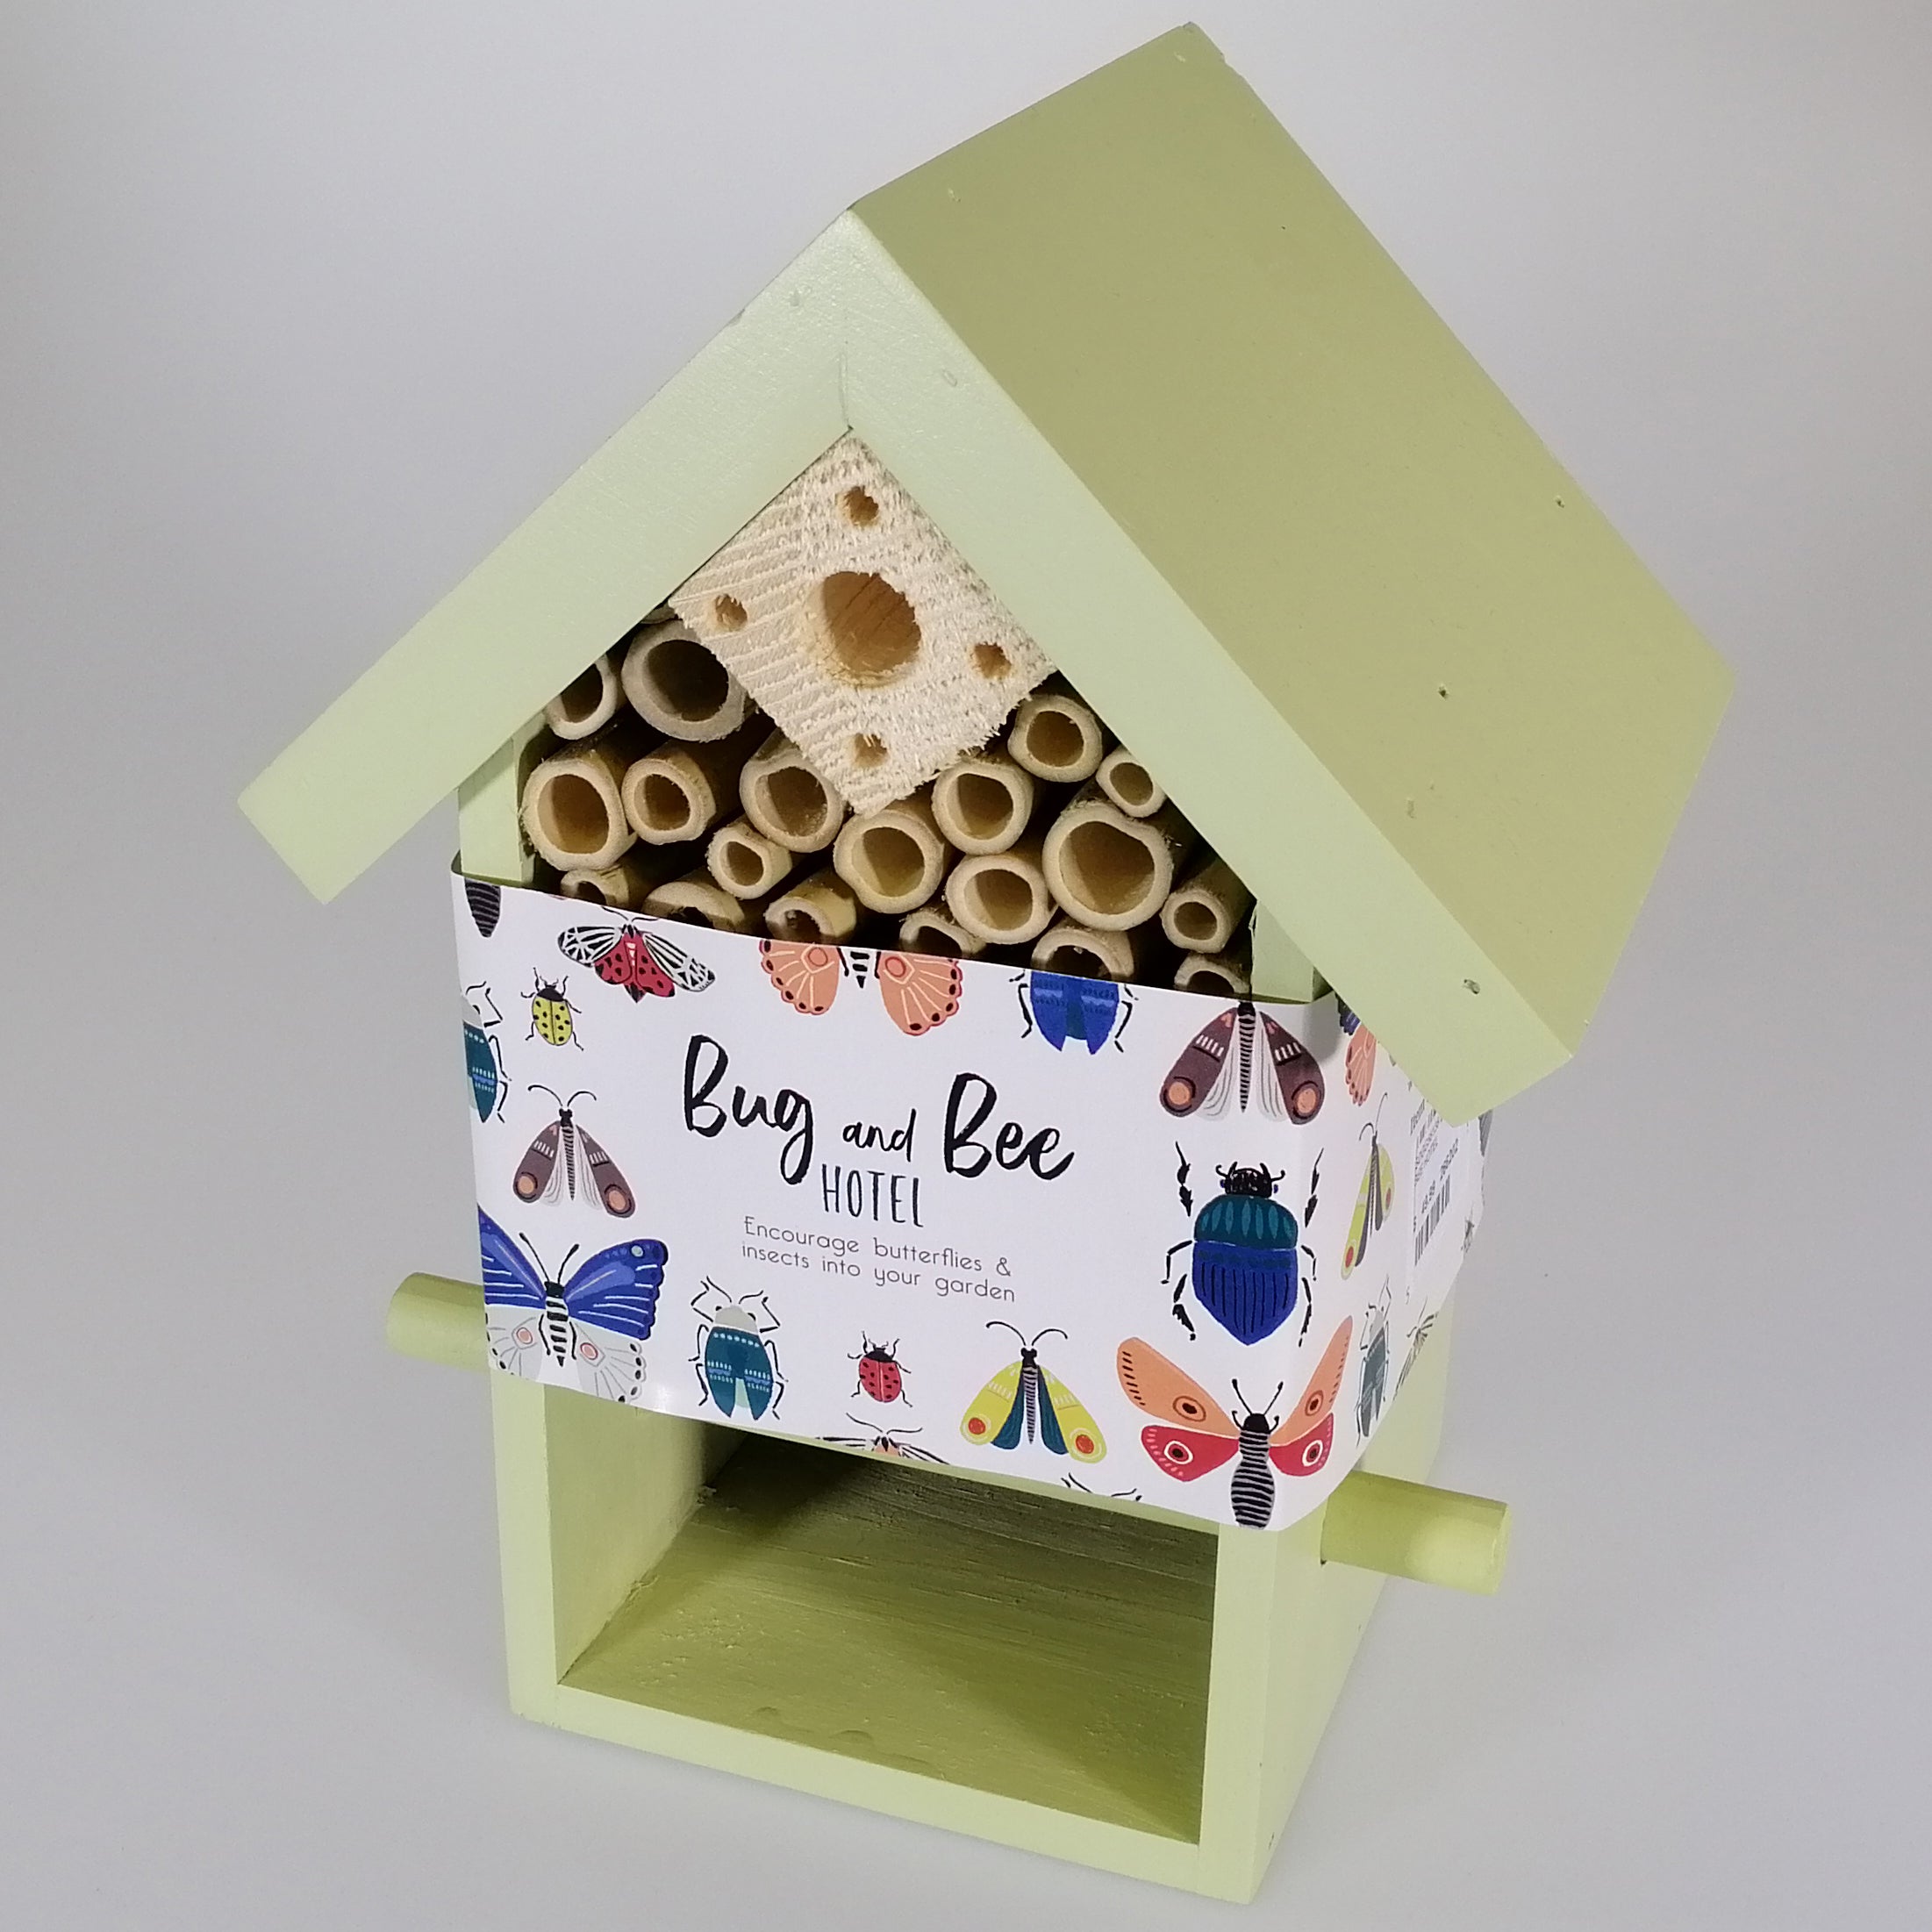 Bee and Insect House - Bug and Bee Hotel